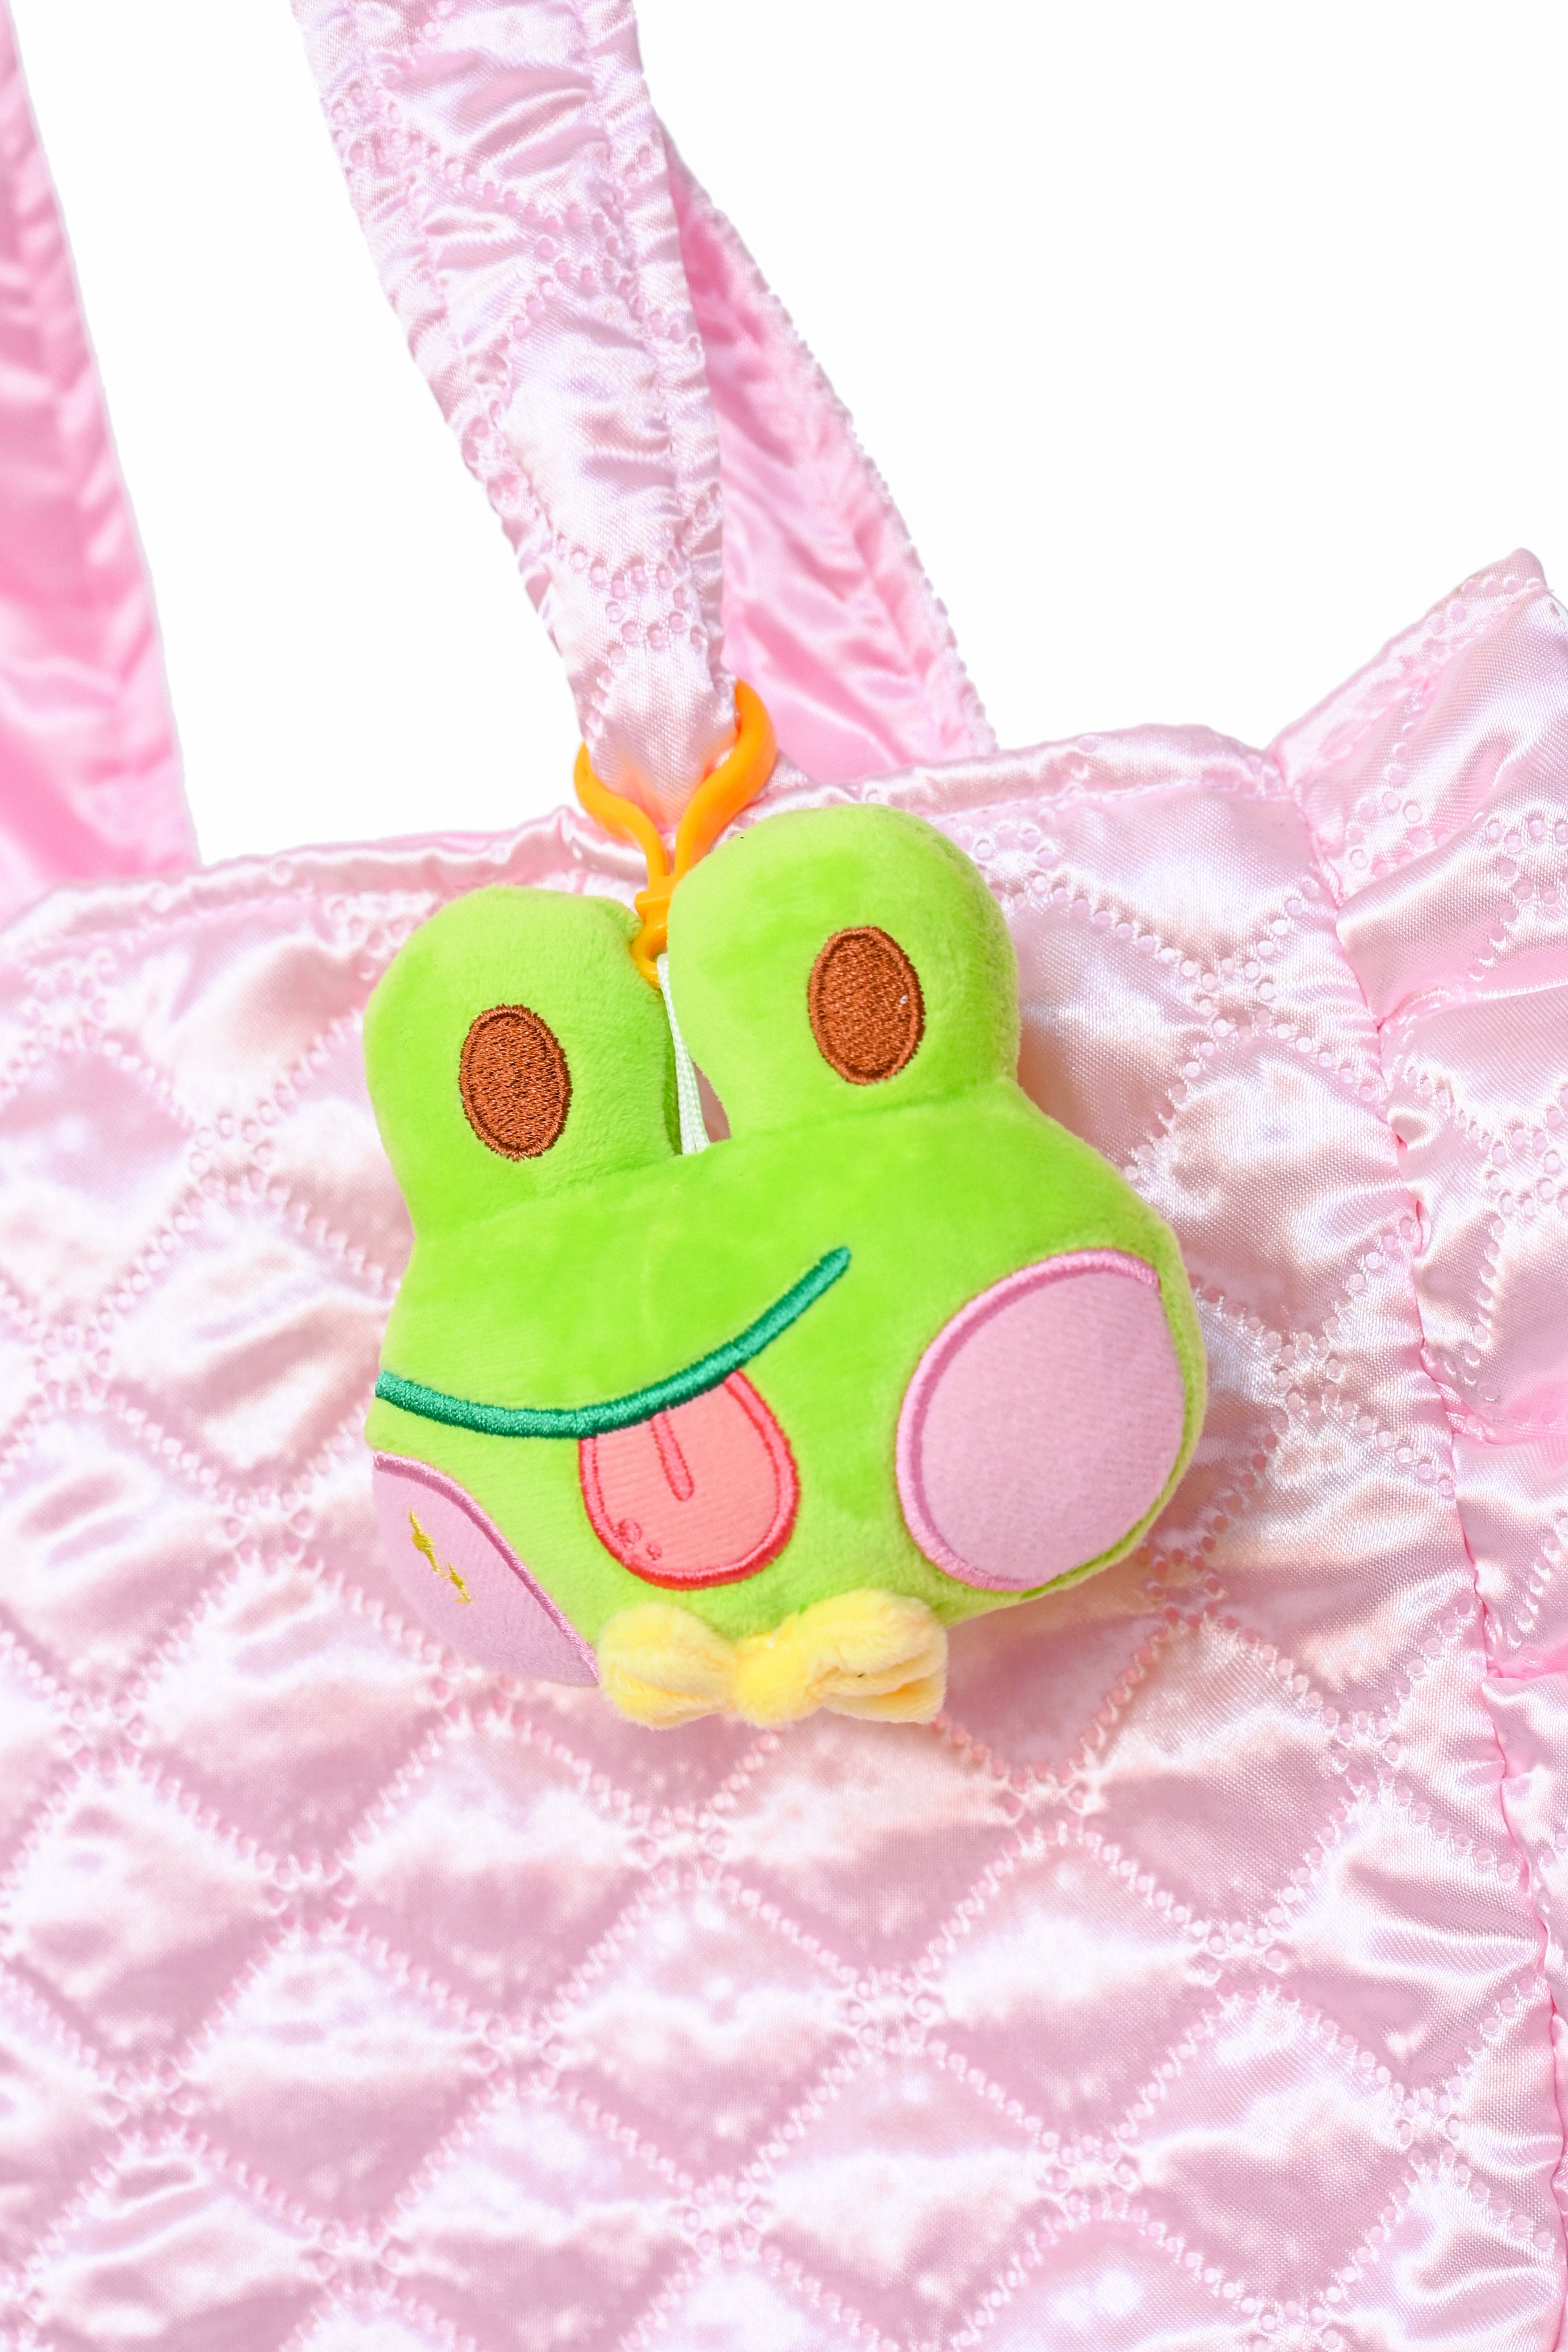 Silly green frog keychain with a yellow bowtie